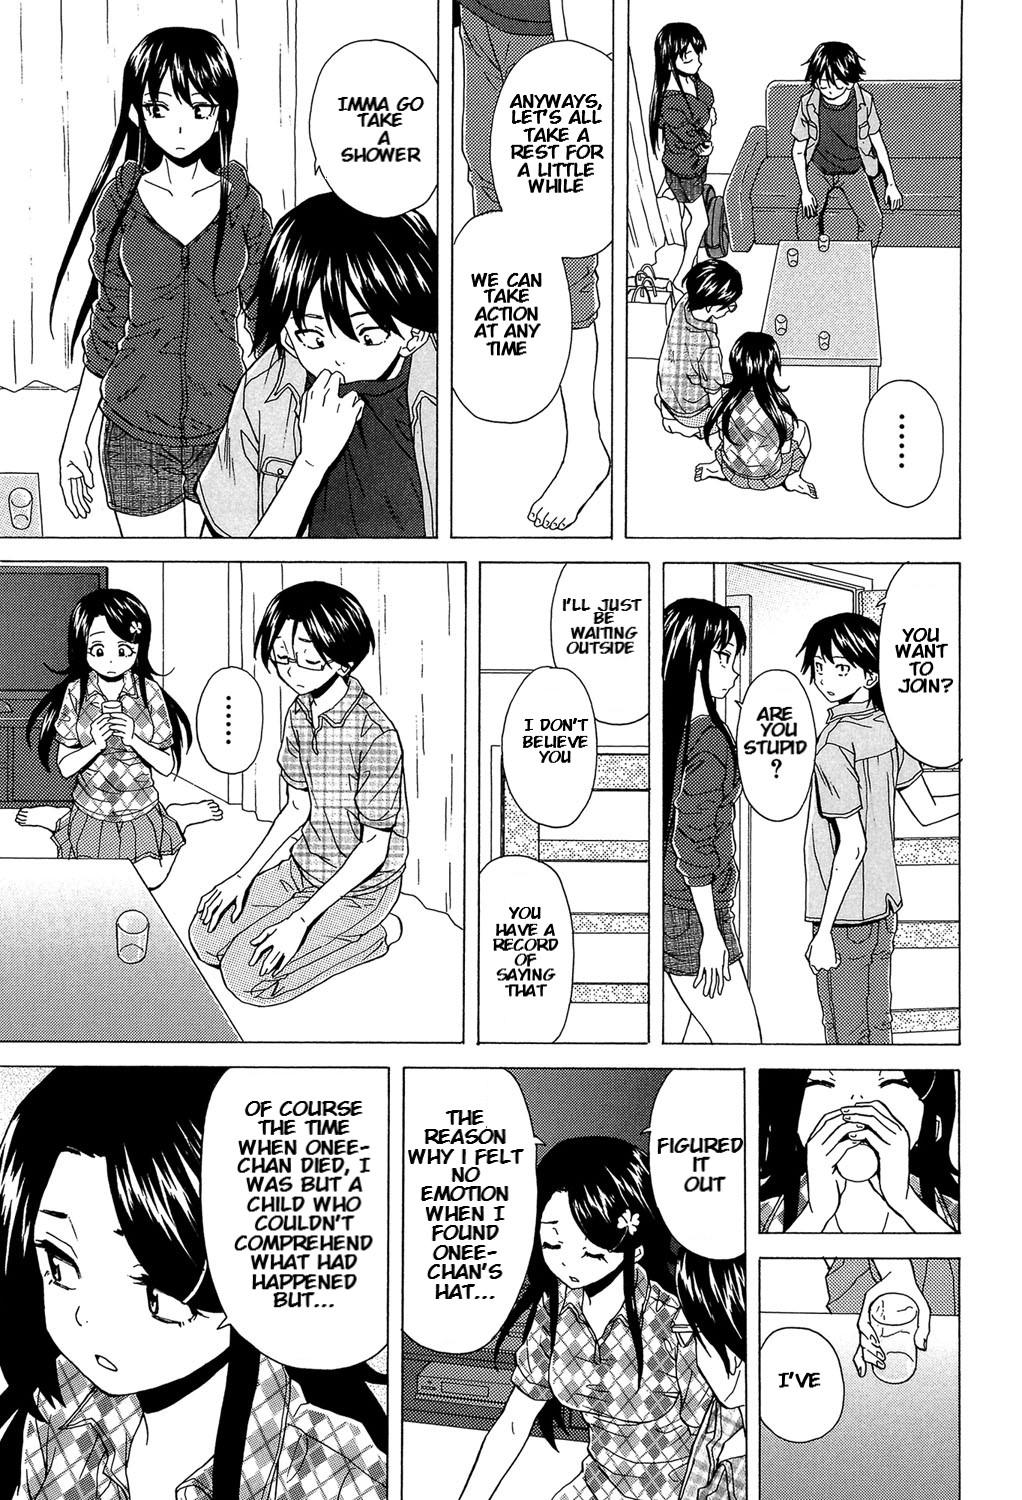 Ass Lick Sono Tobira no Mukougawa - behind the door Ch. 5 Huge - Page 5